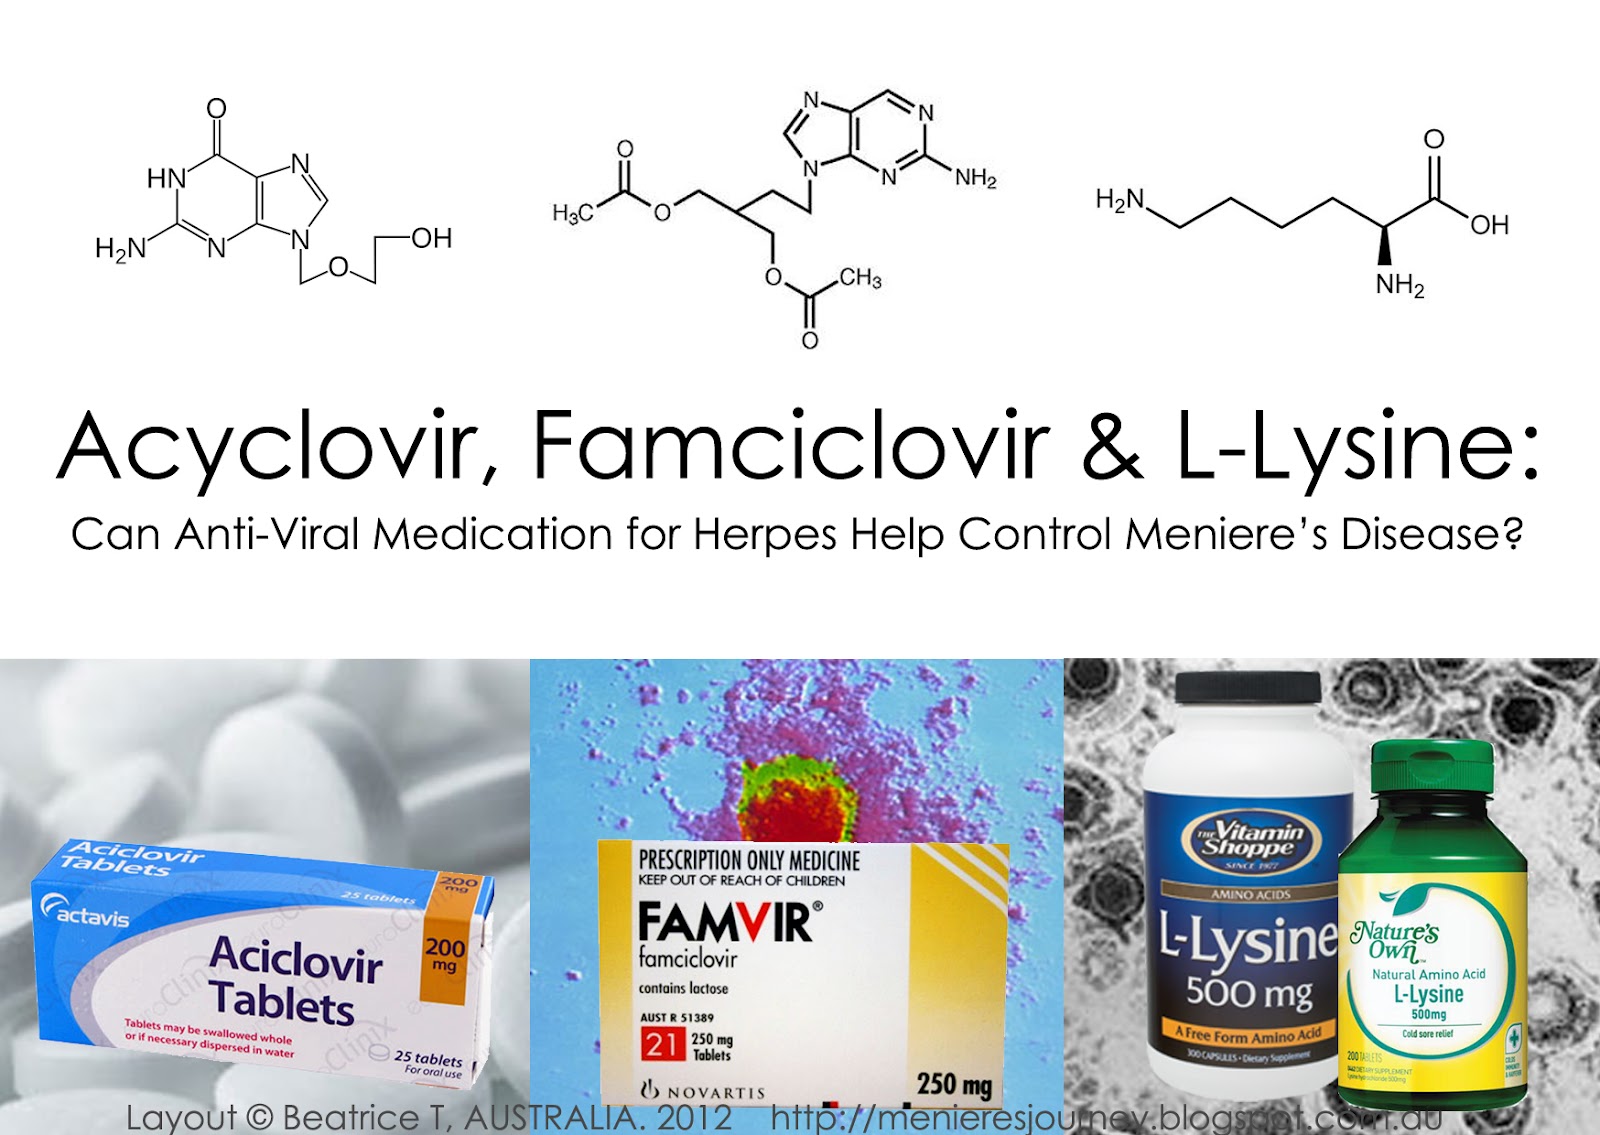 what is the drug famciclovir used to treat